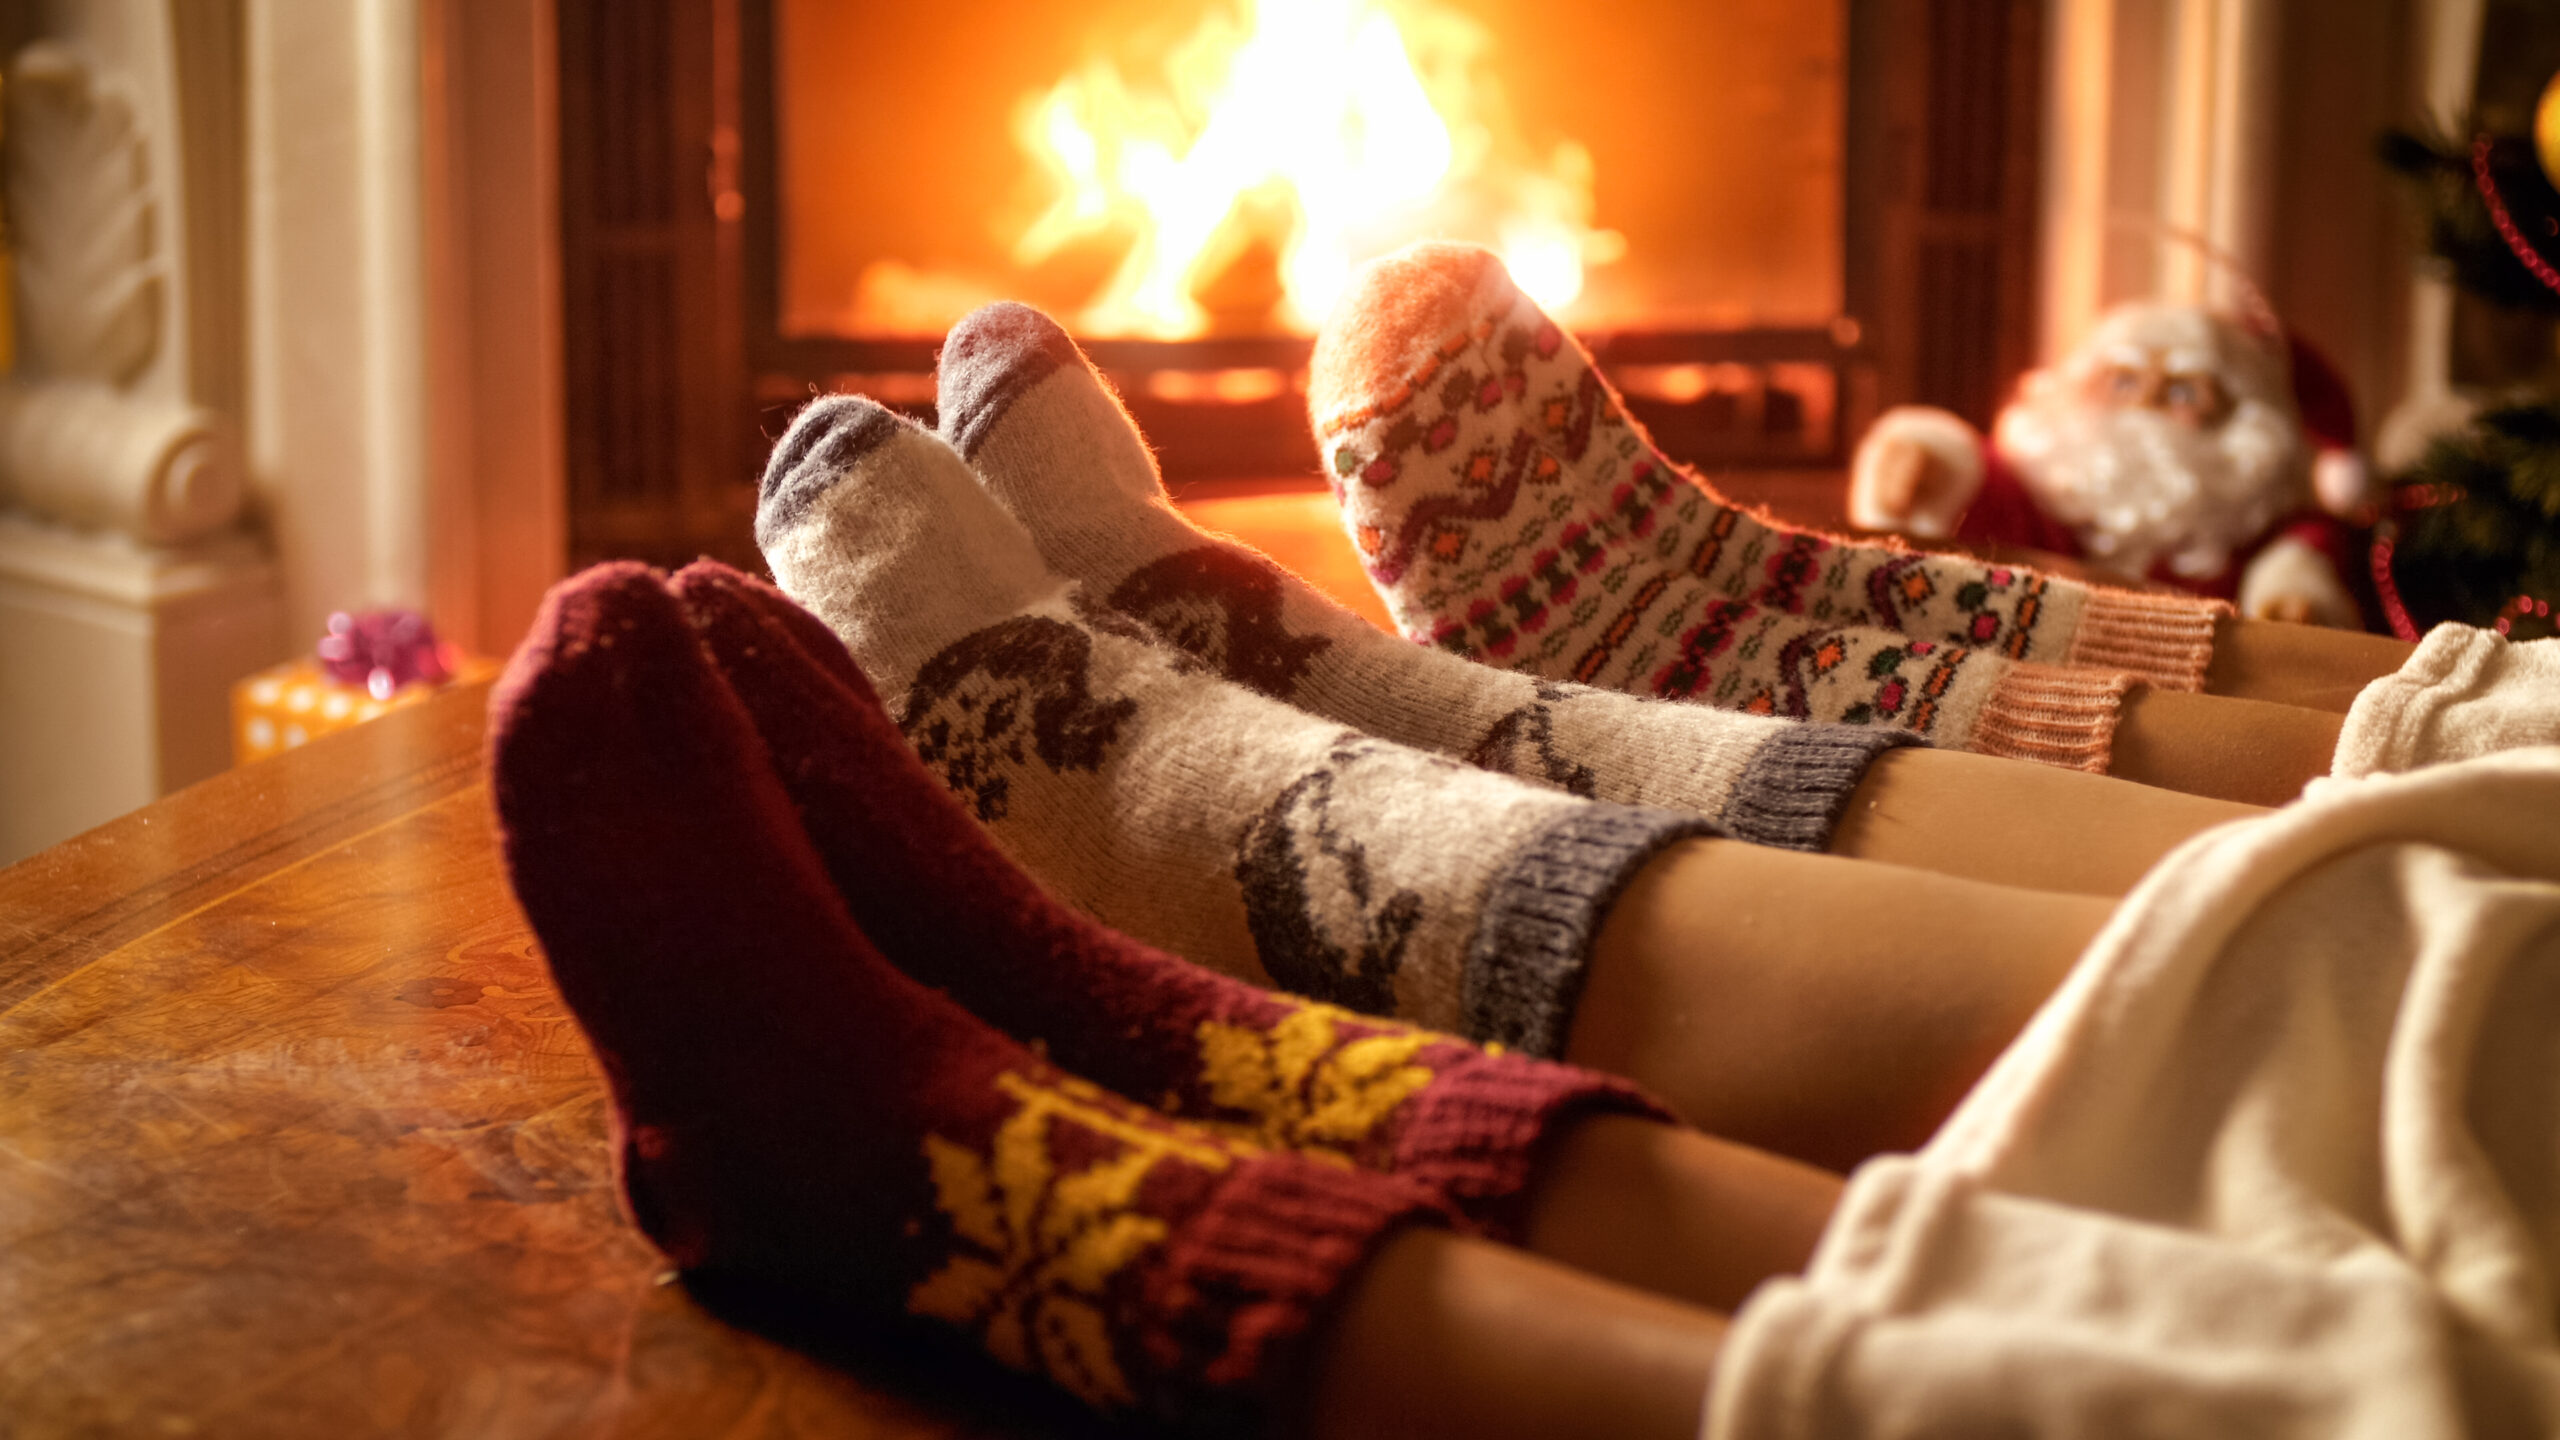 Closeup image of family feet in woolen socks lying next to fireplace